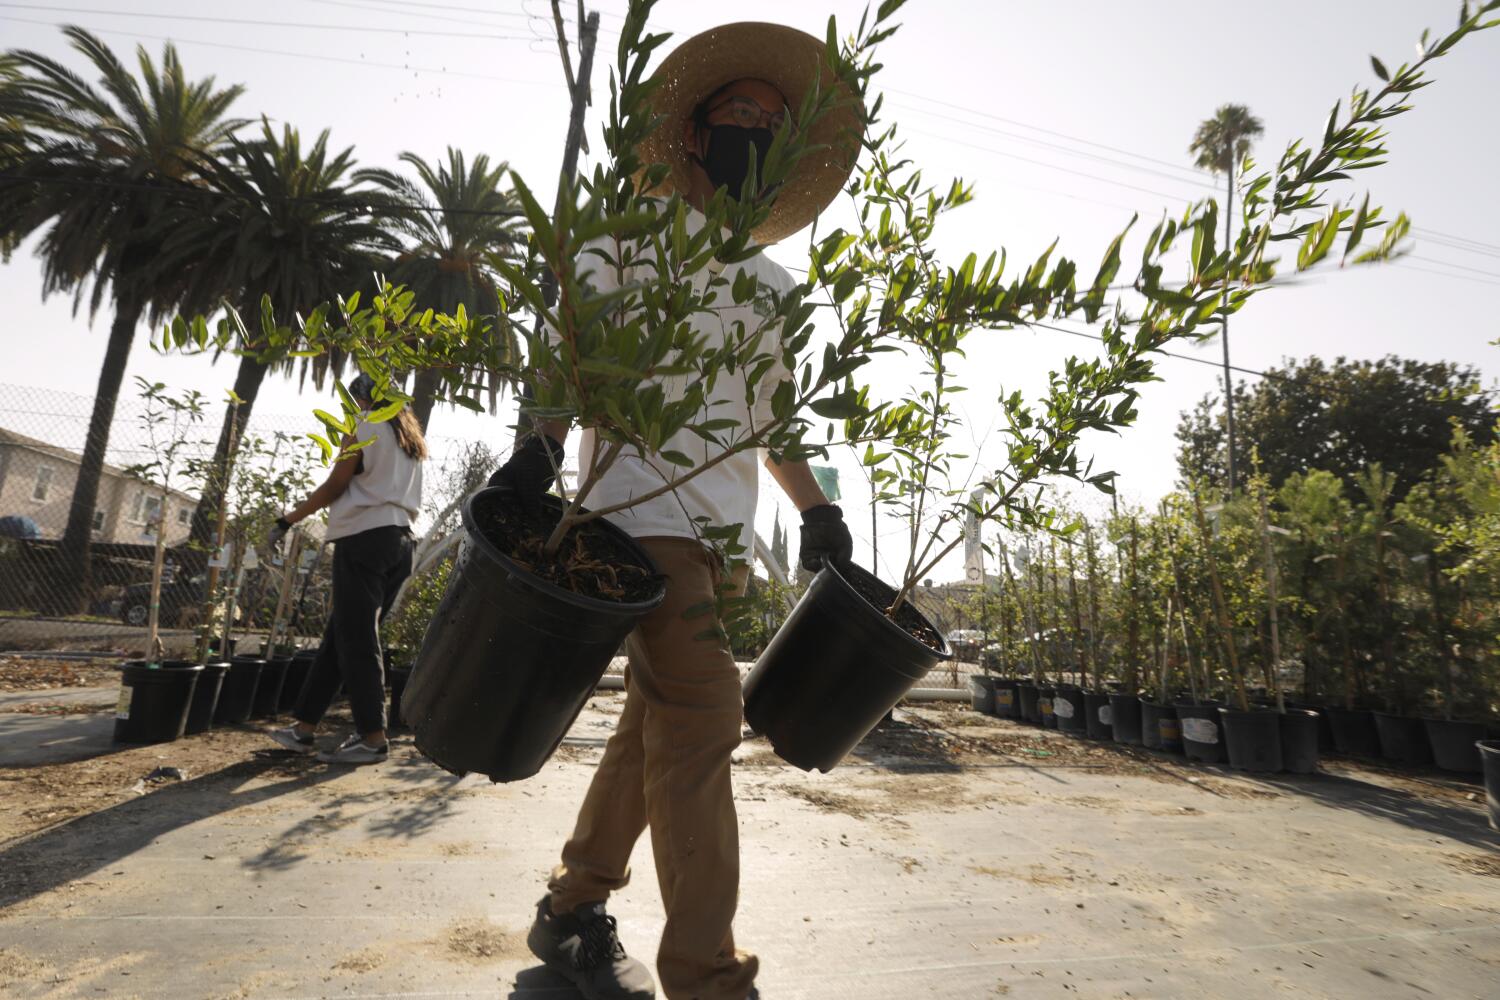 Feds award $1 billion to plant trees, combat extreme heat, including $100 million for California